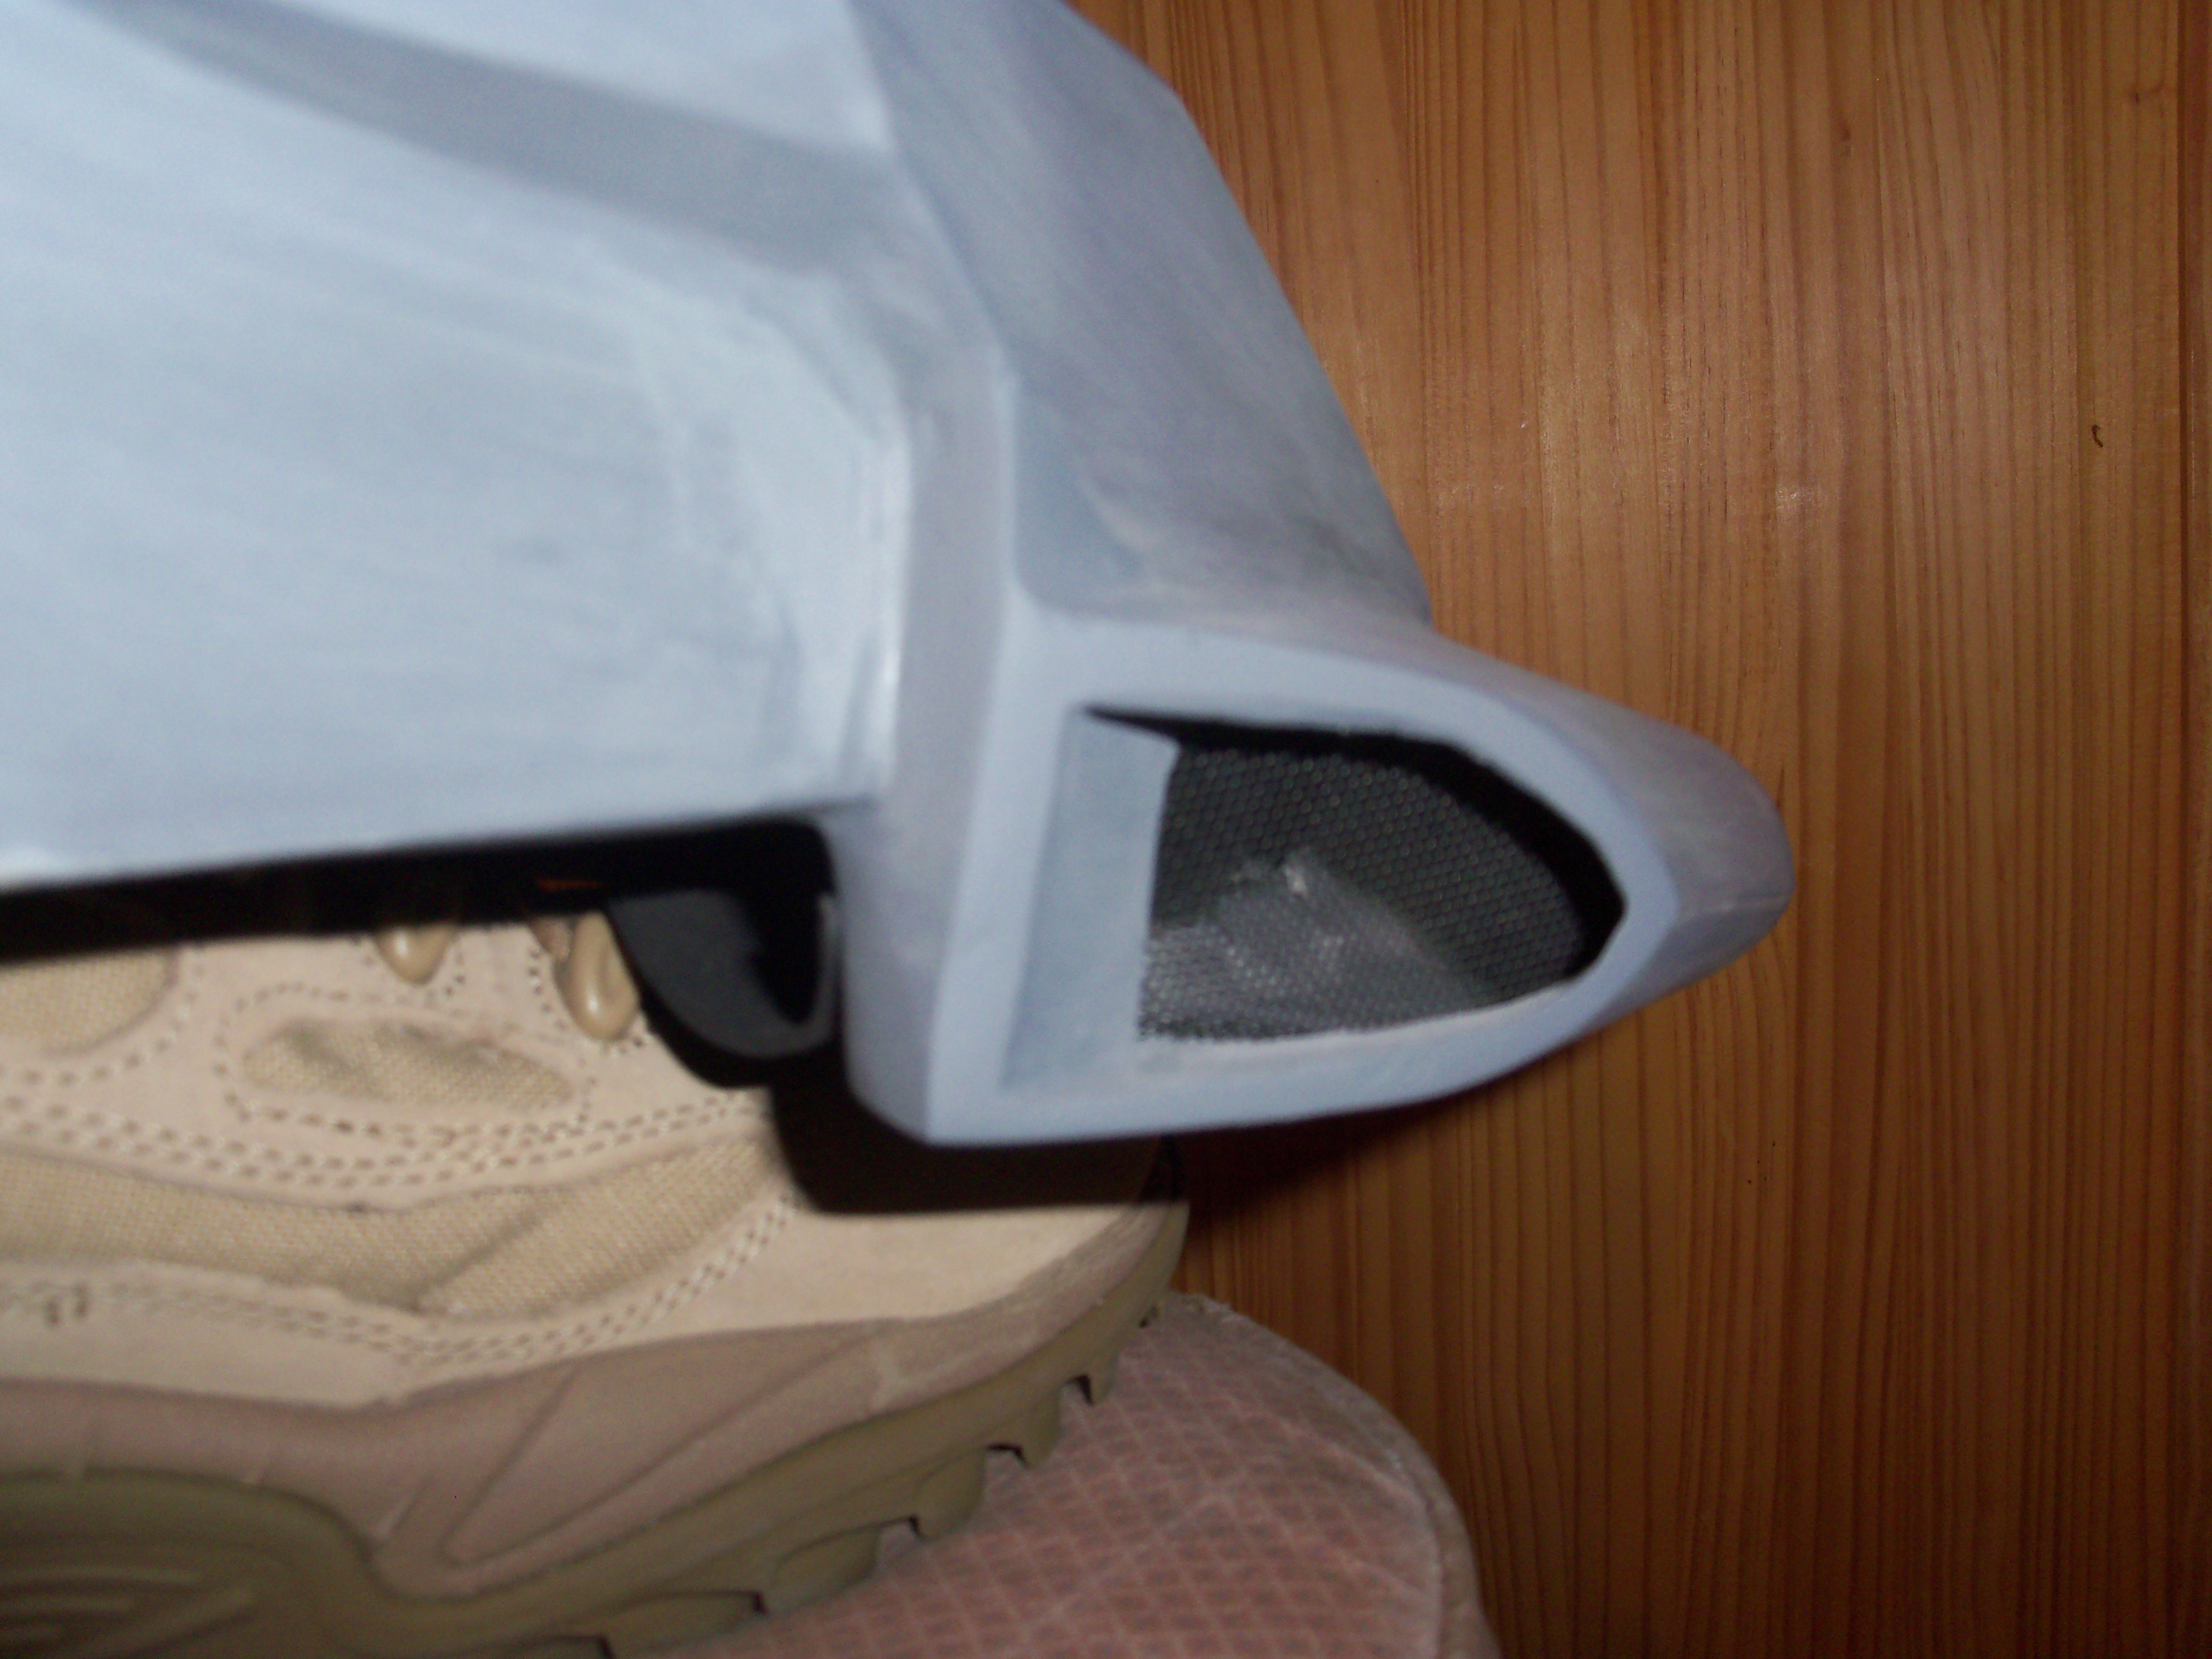 side vents actually work. once attached I cut out the inside of the helmet